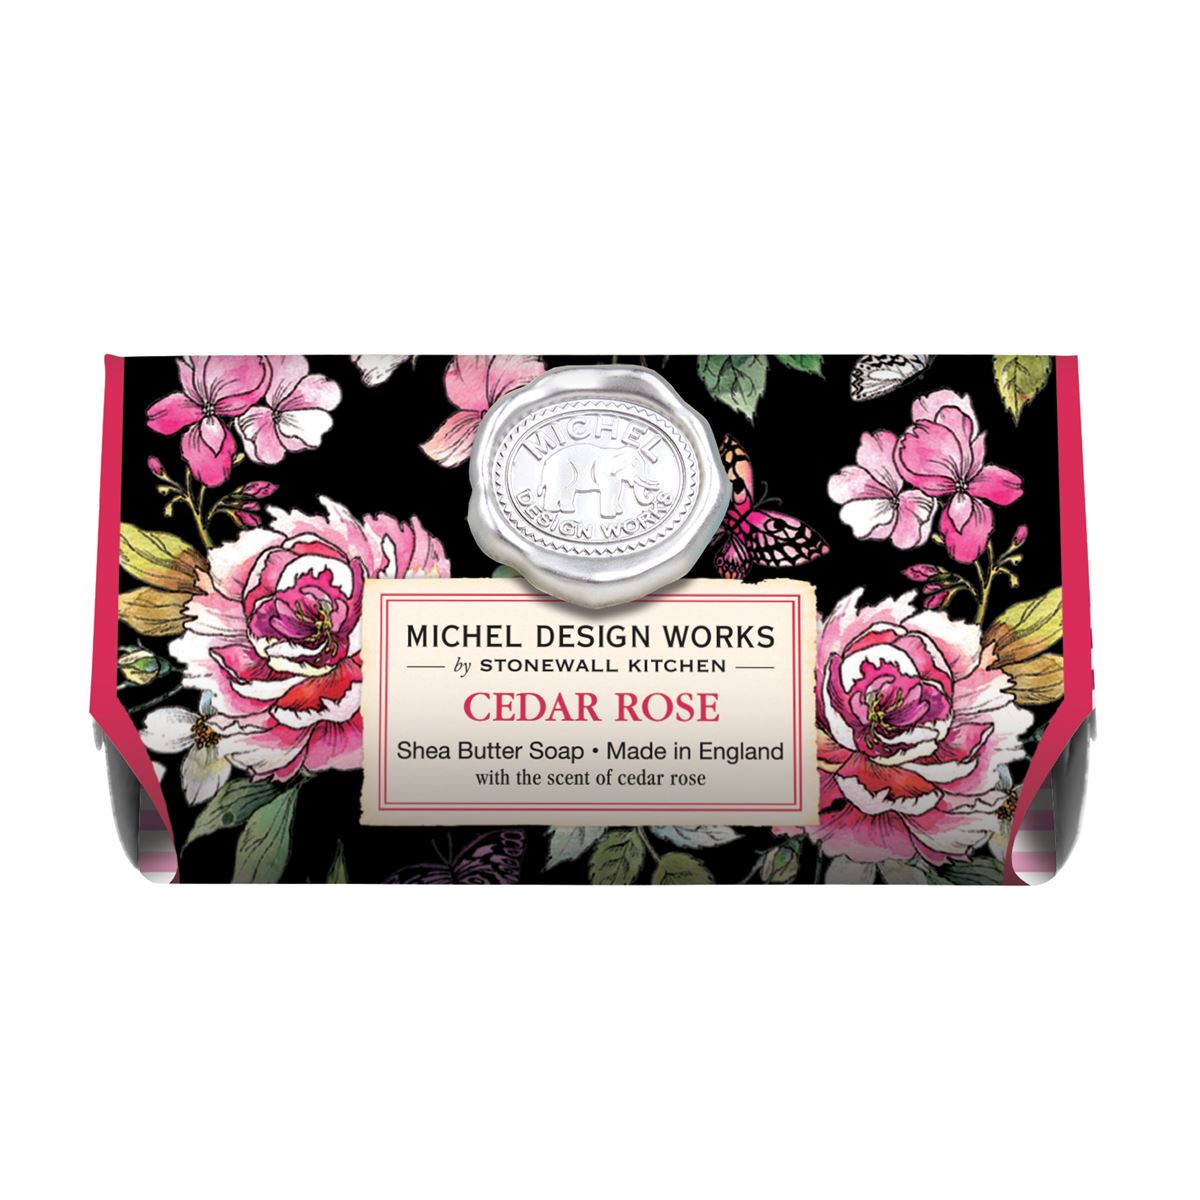 cedar rose shea butter bath soap bar in the black with pink flowers all over on a white background